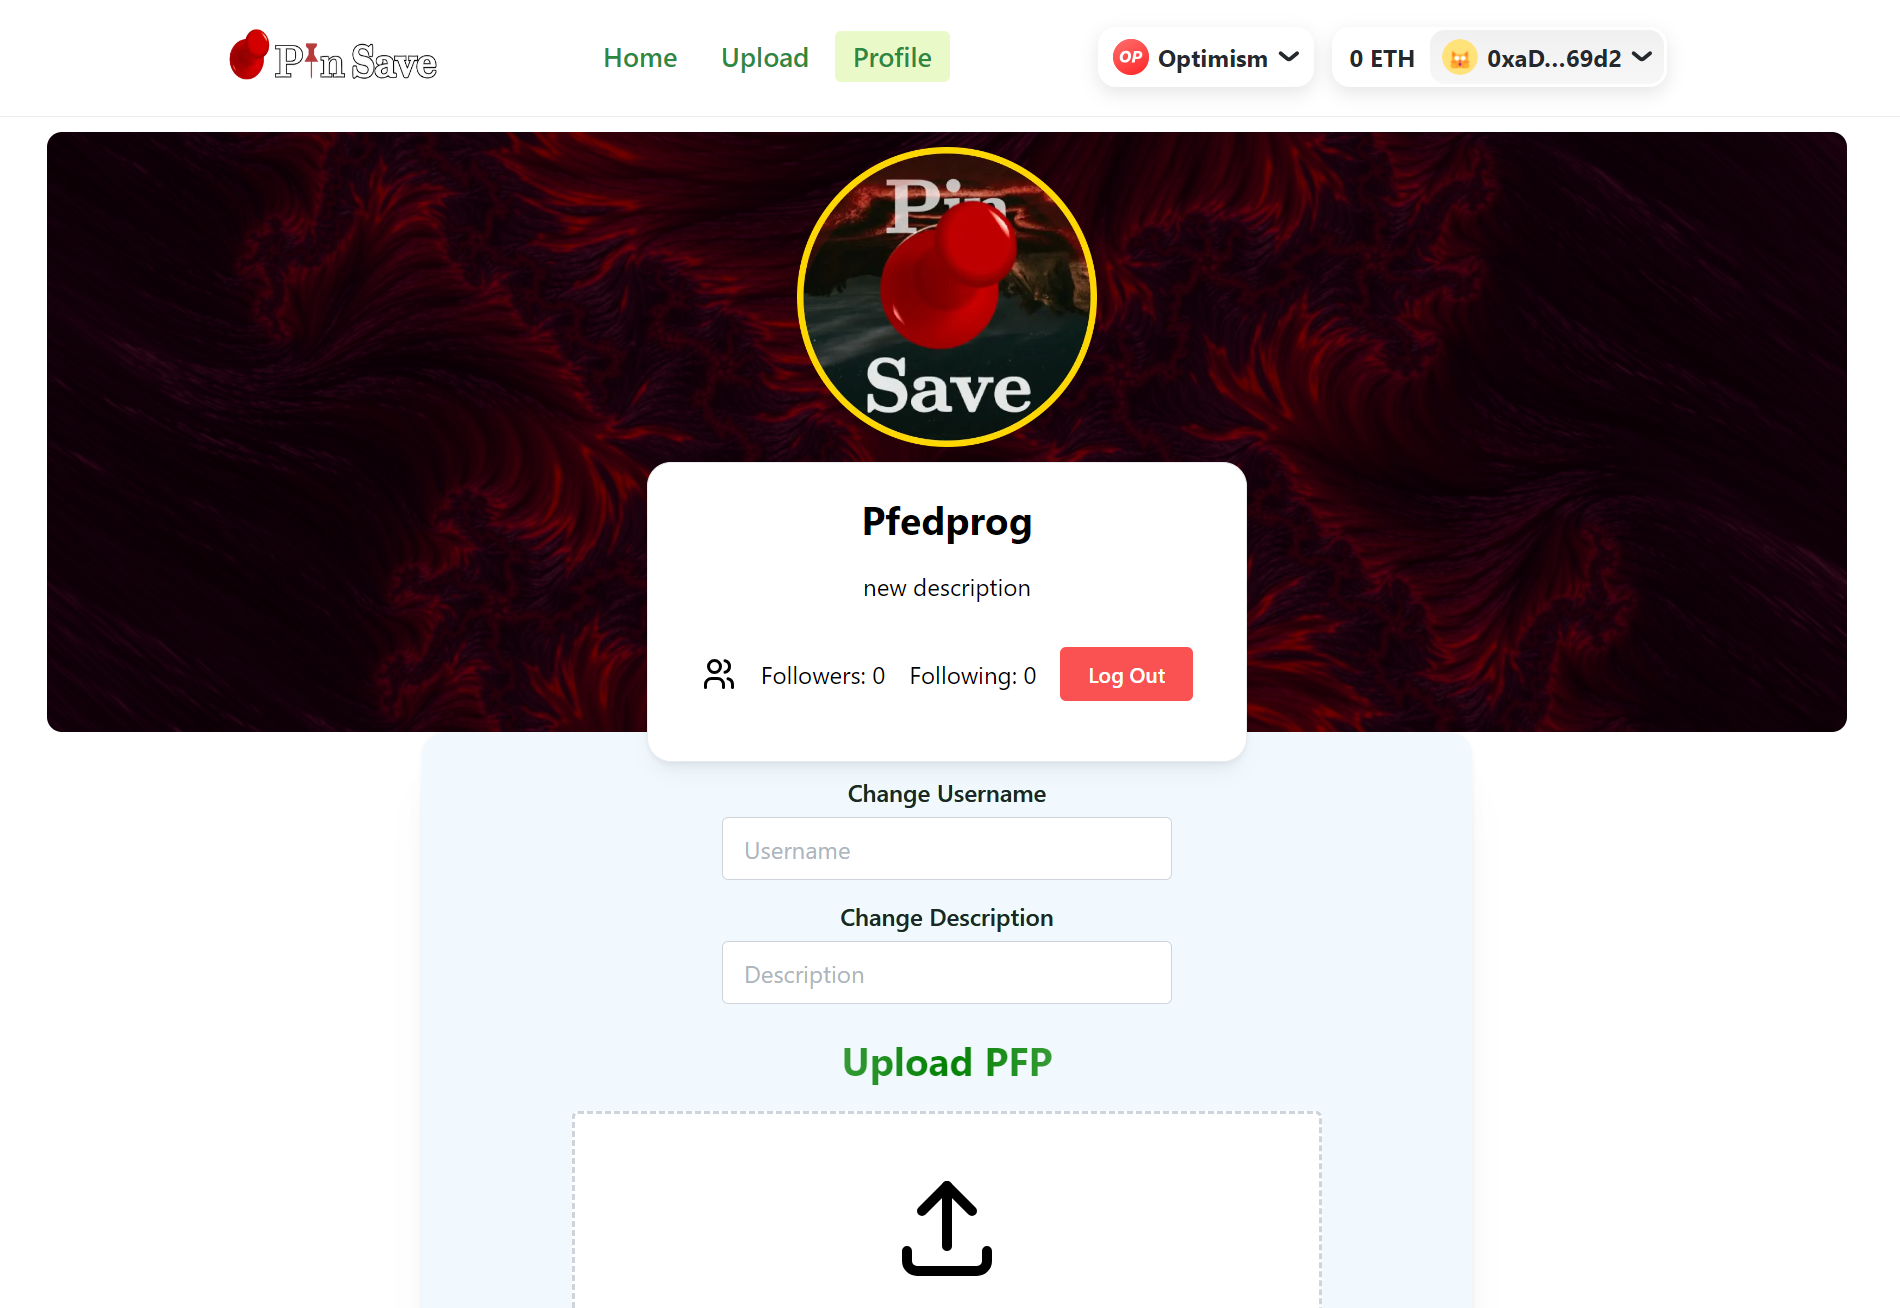 Pin Save update your profile page